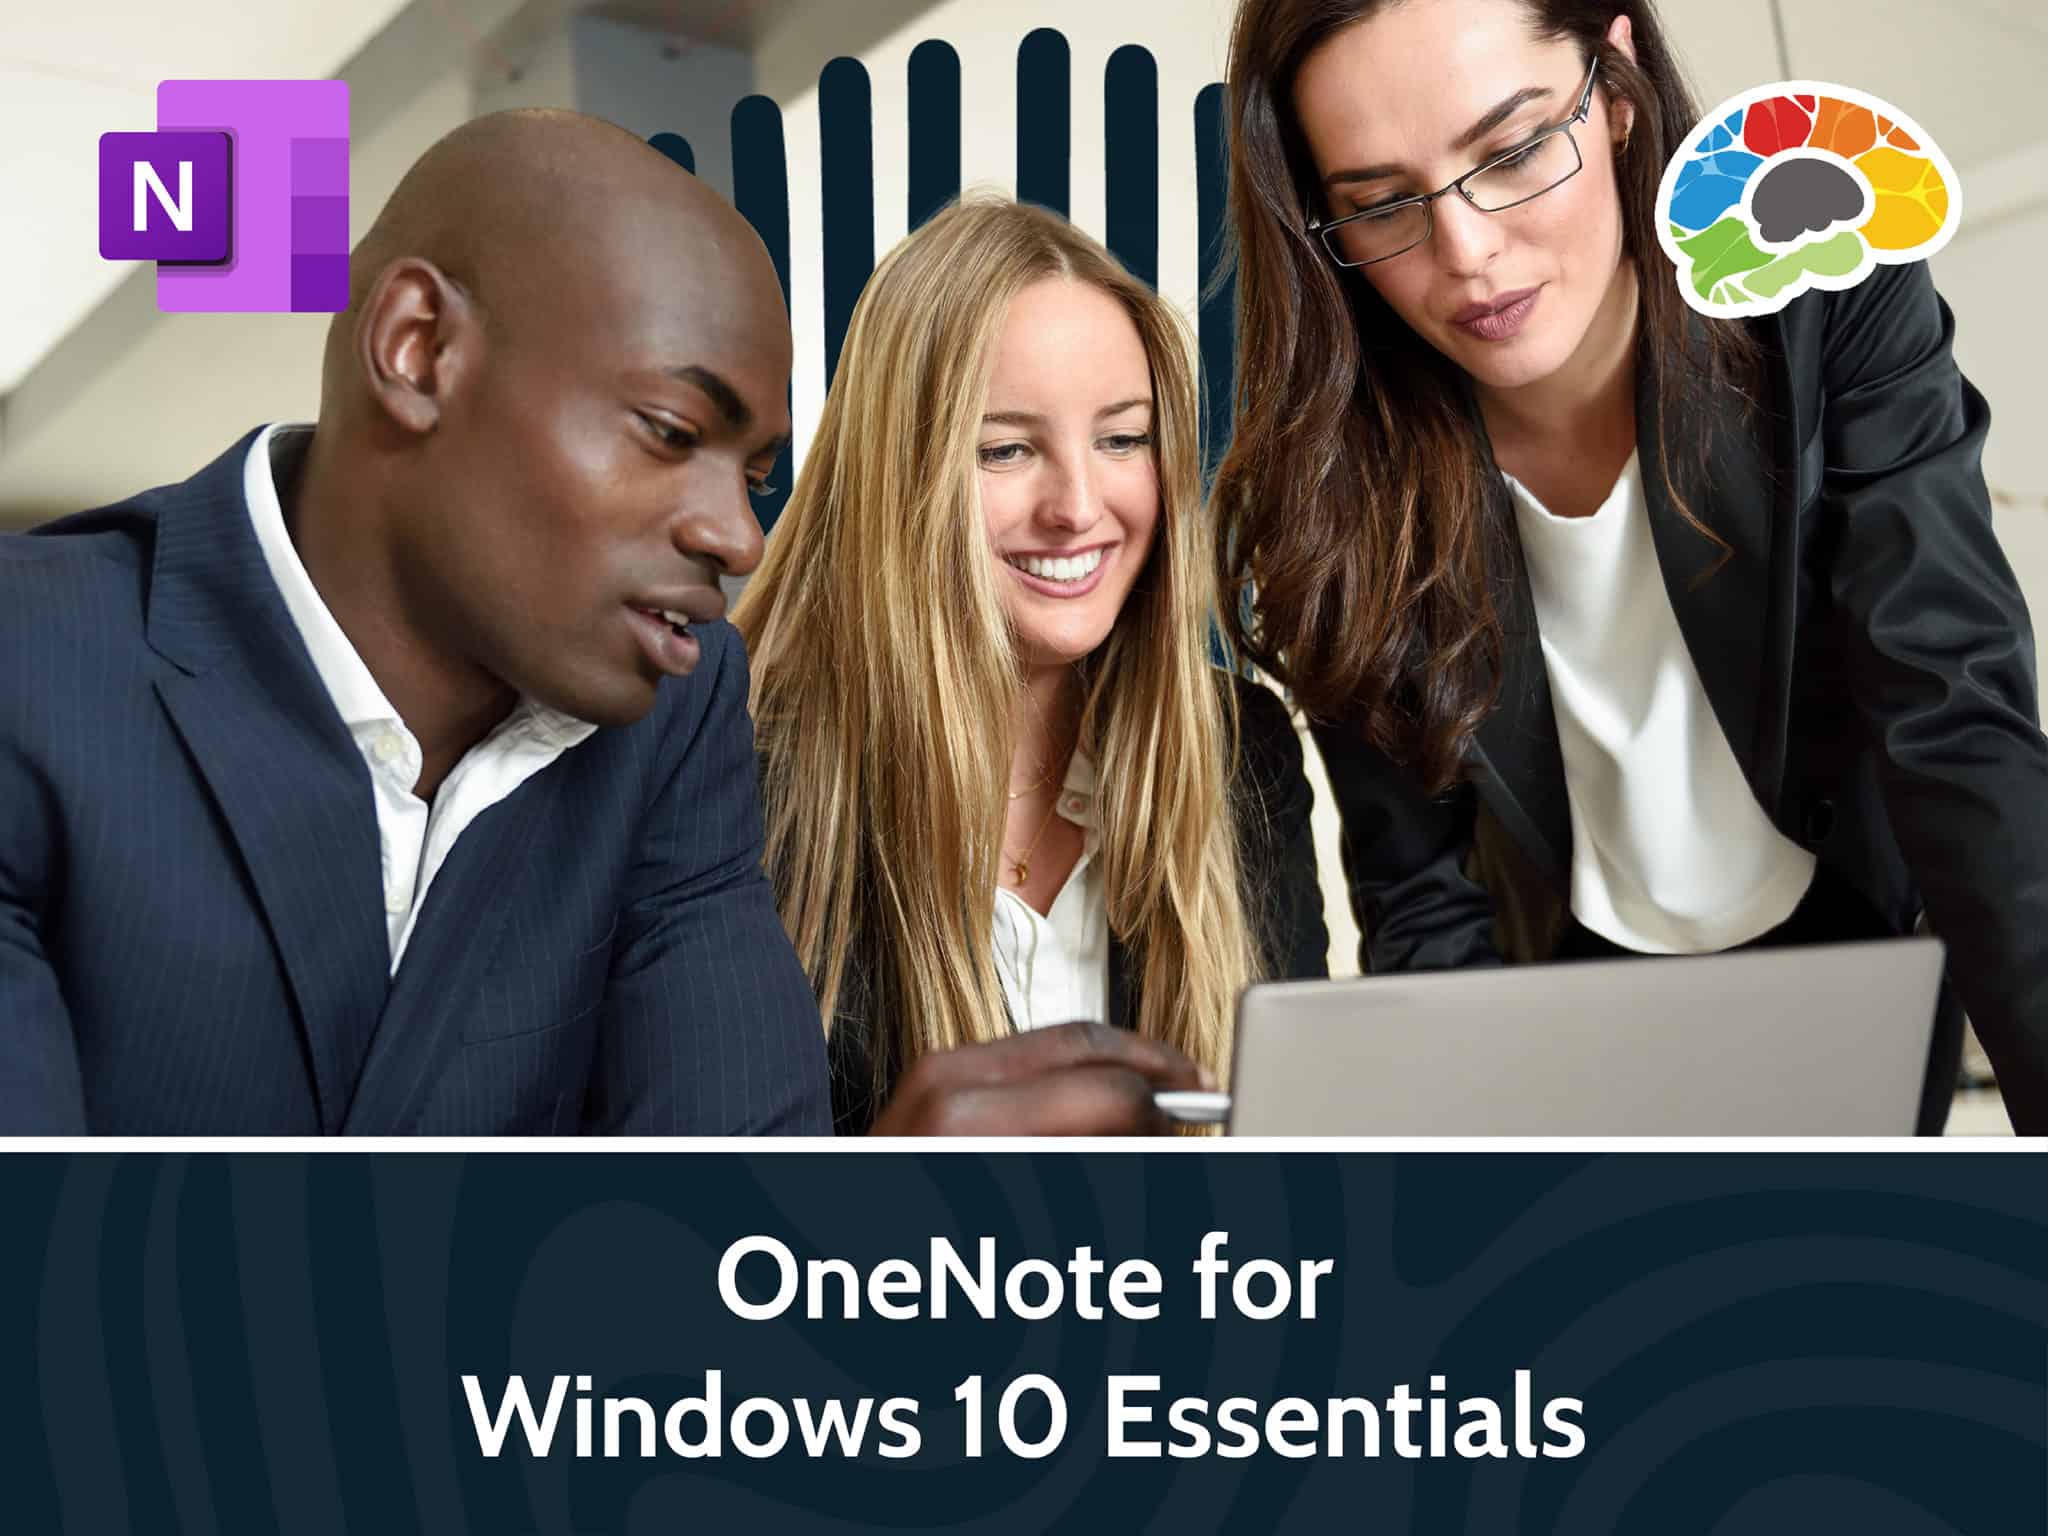 OneNote for Windows 10 Essentials scaled